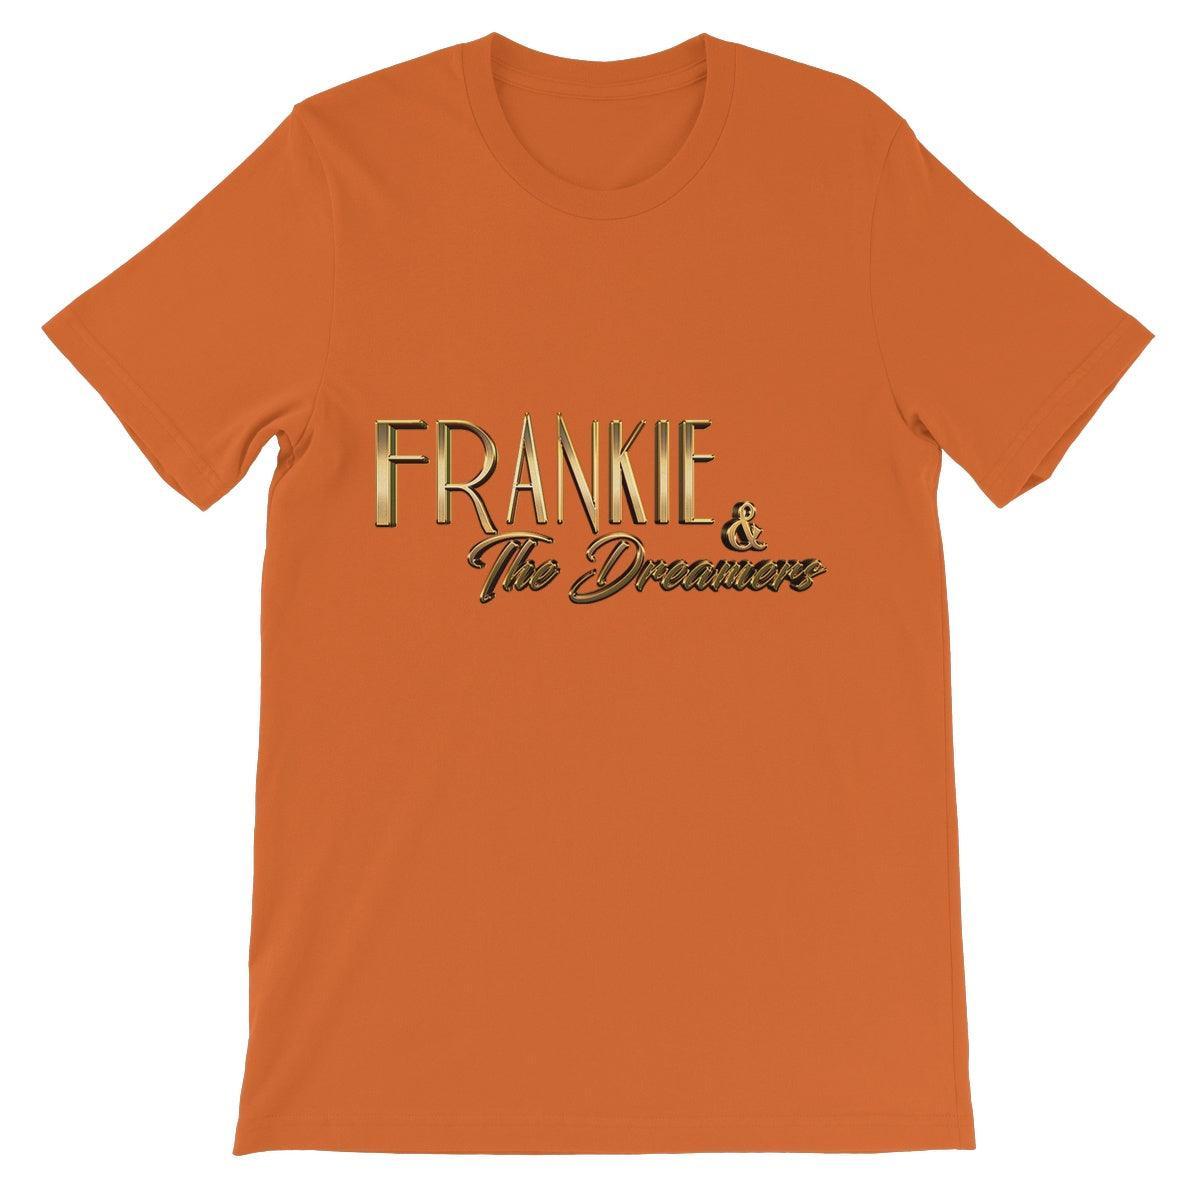 Frankie And The Dreamers Unisex Short Sleeve T-Shirt | Apparel Orange